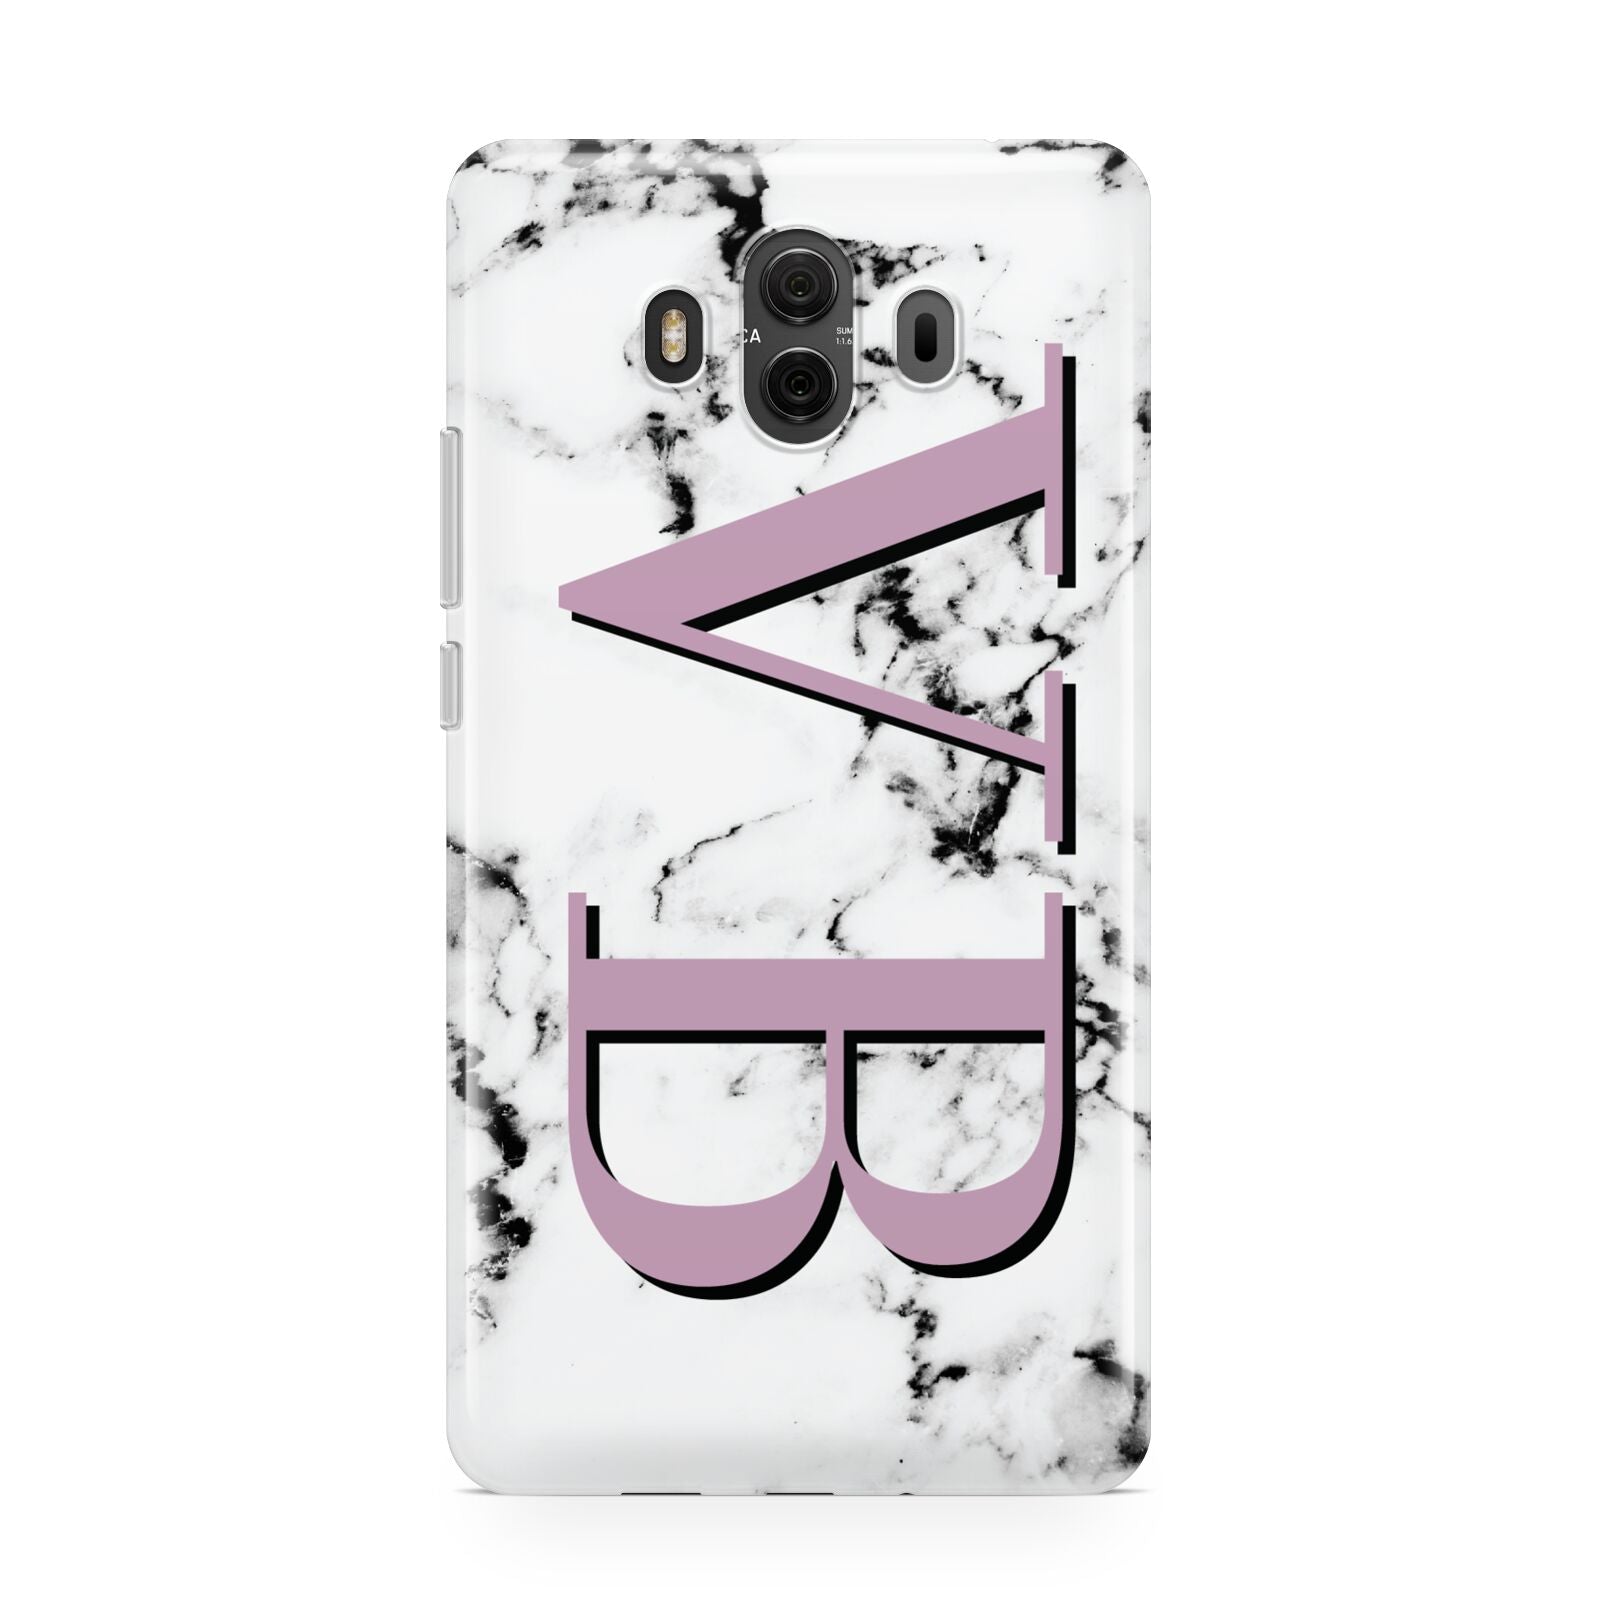 Personalised Purple Big Initials Marble Huawei Mate 10 Protective Phone Case